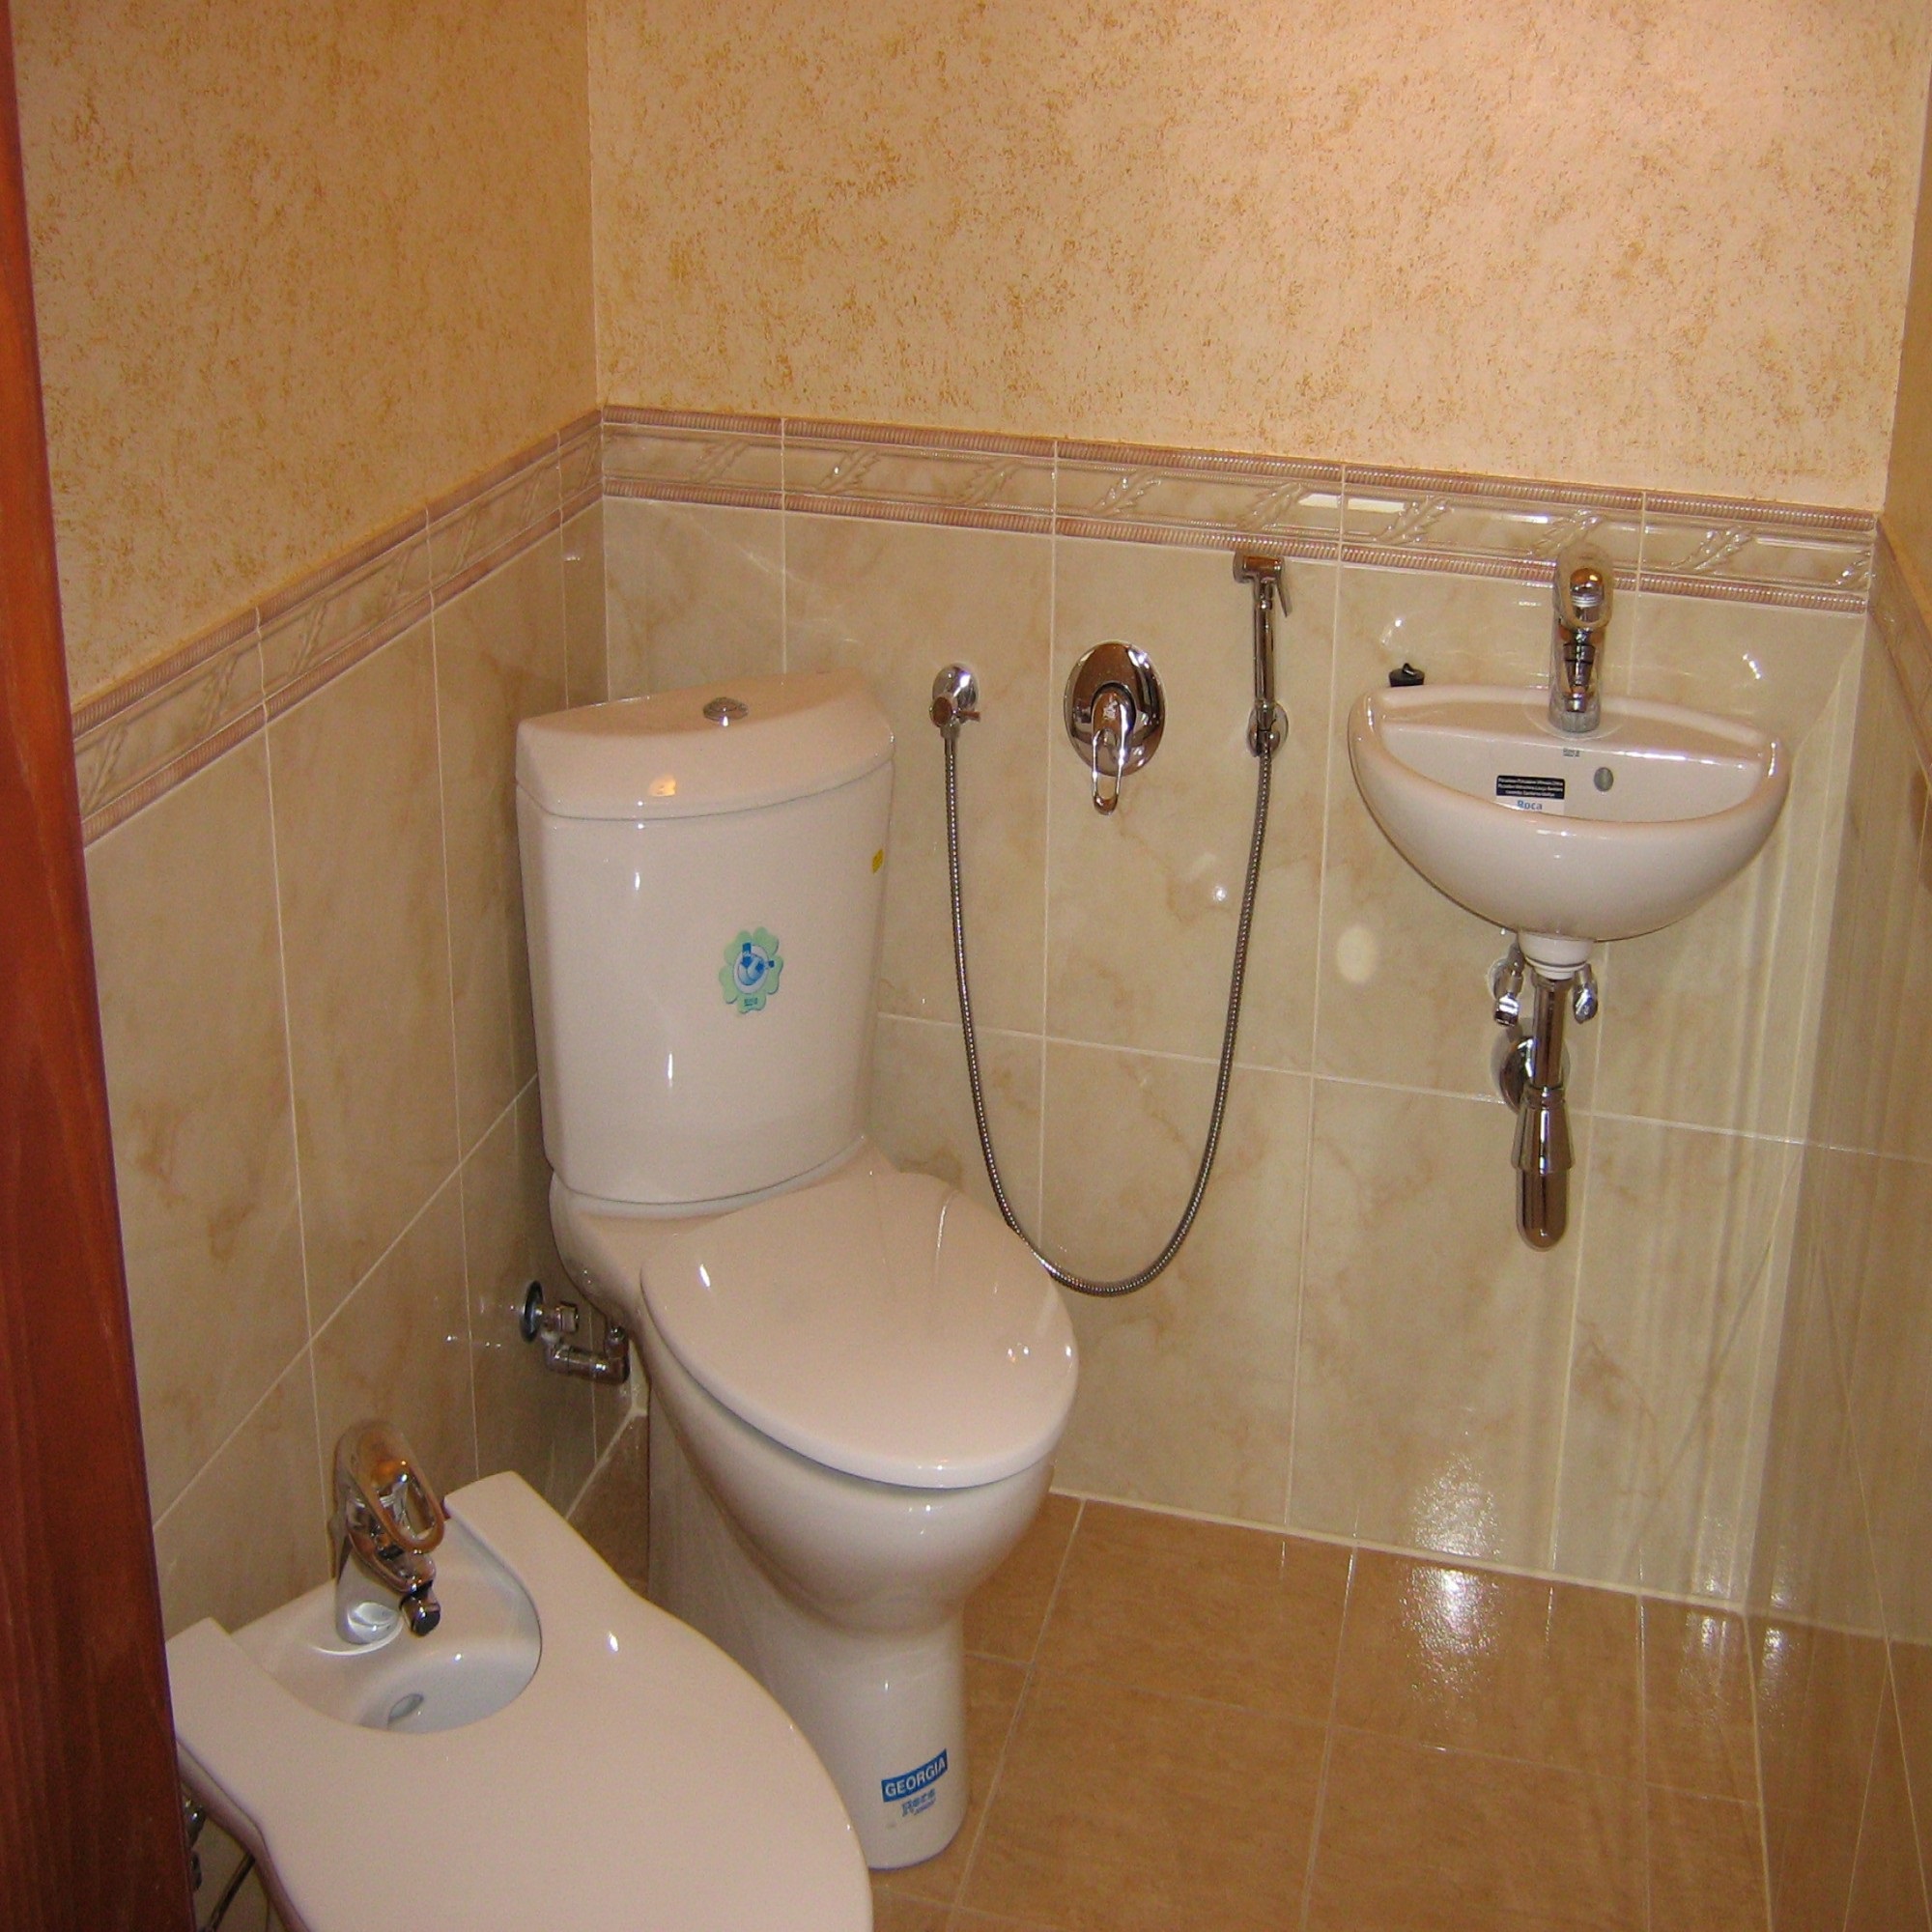 An example of a bright style of a bathroom in beige color